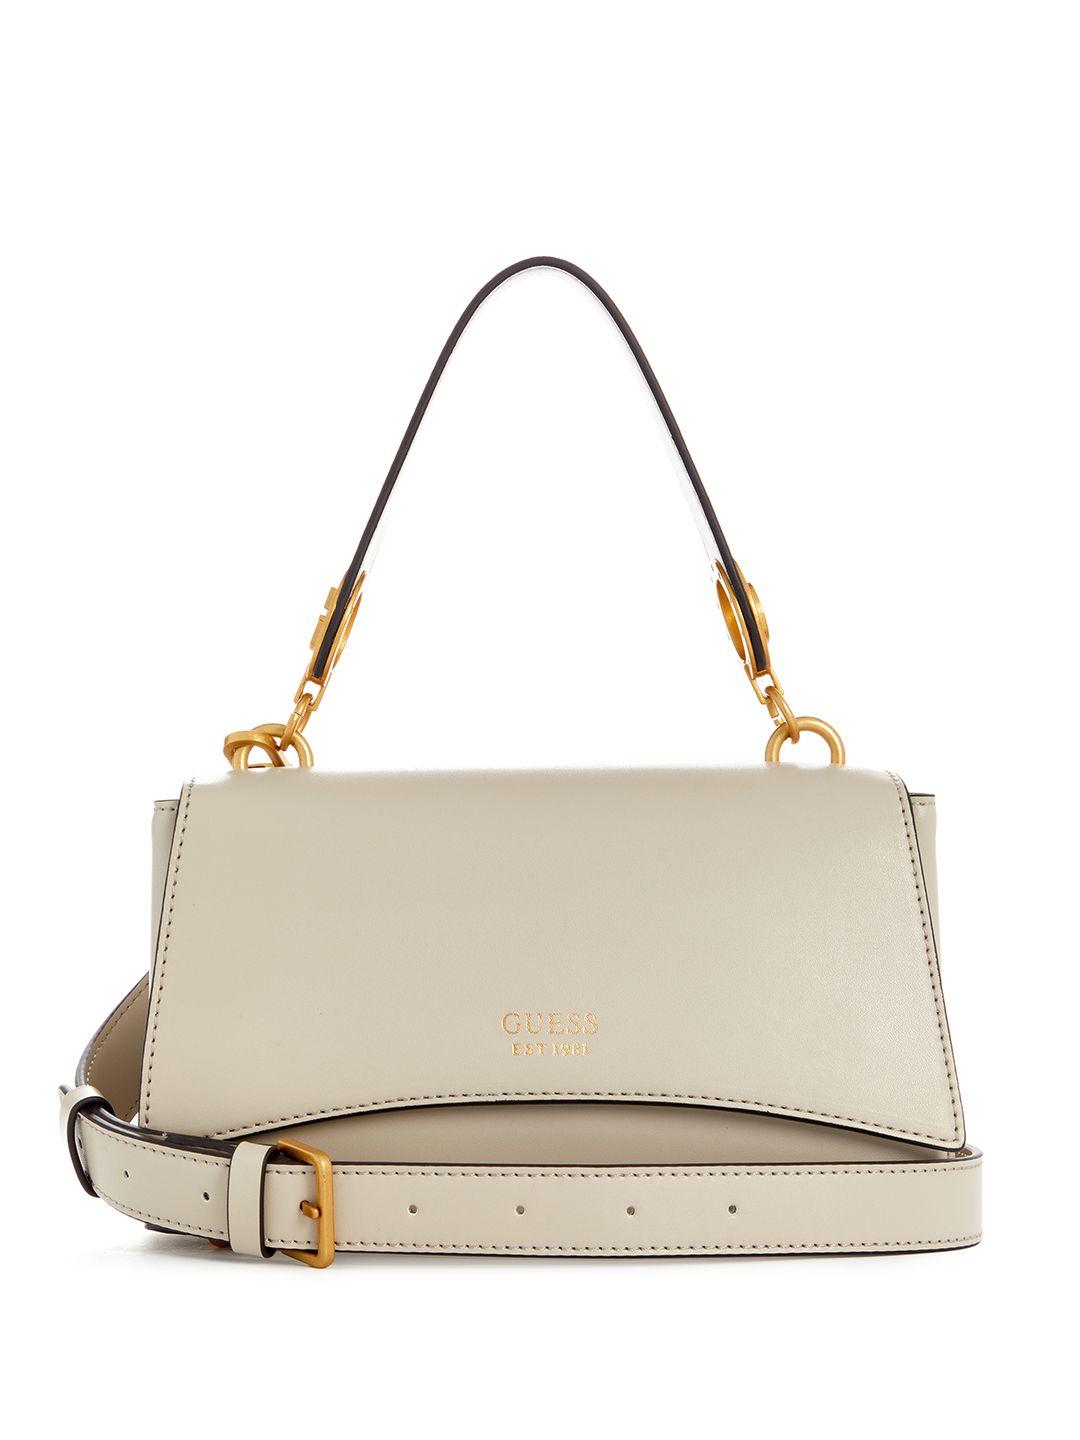 guess structured satchel bag